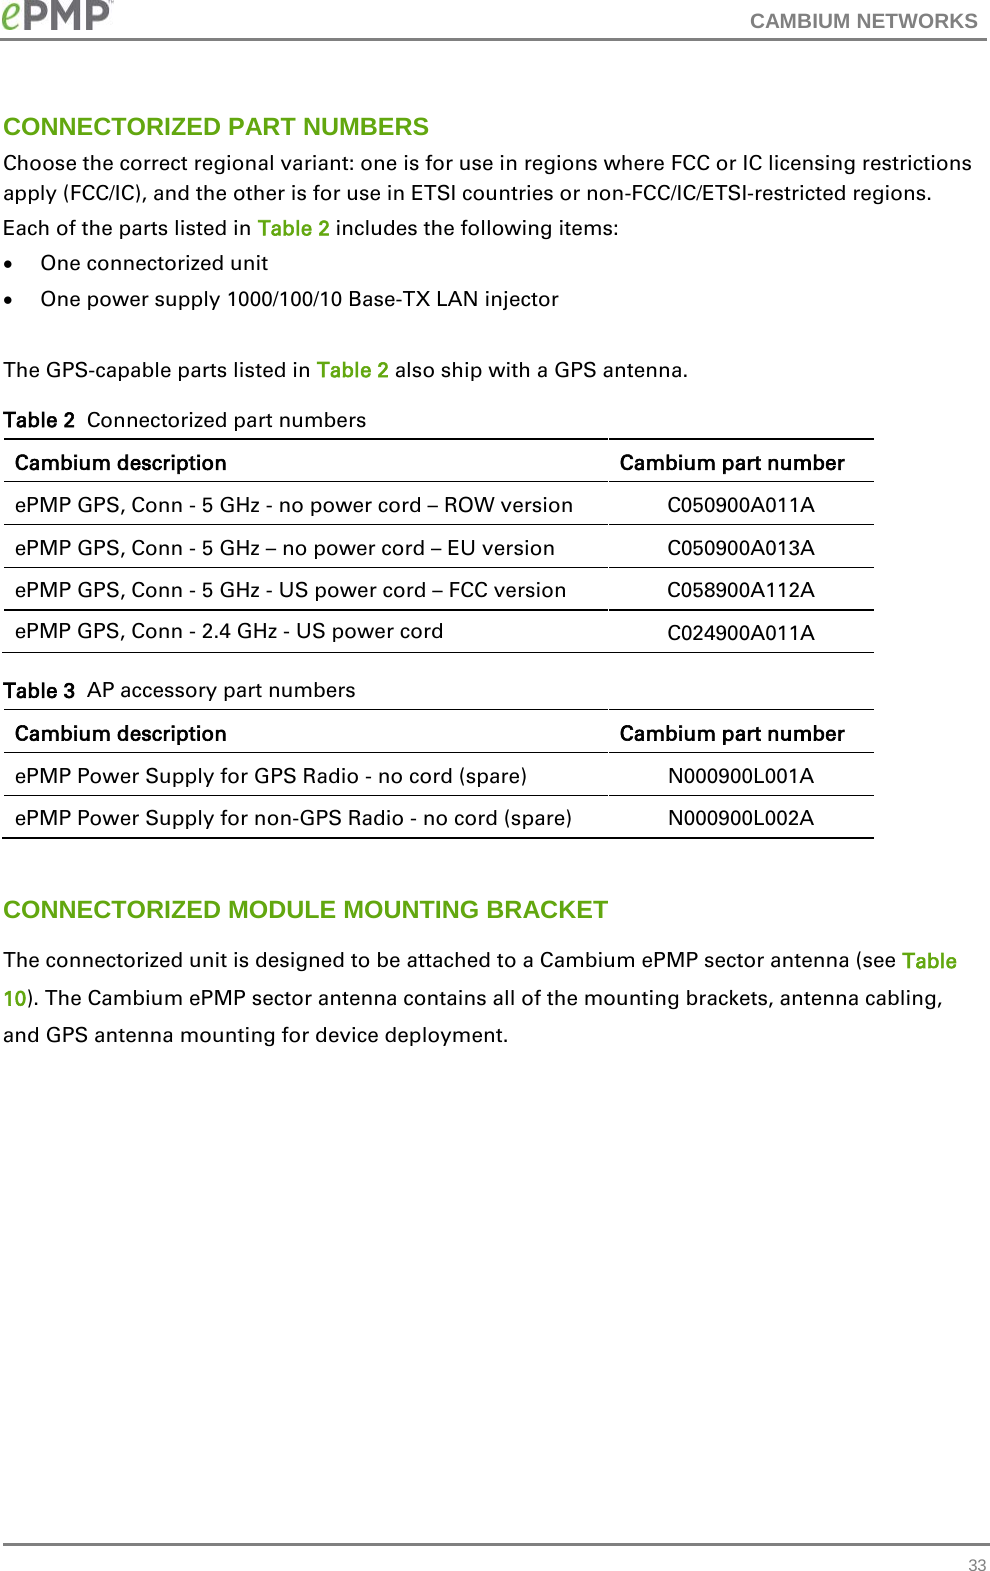 CAMBIUM NETWORKS  CONNECTORIZED PART NUMBERS Choose the correct regional variant: one is for use in regions where FCC or IC licensing restrictions apply (FCC/IC), and the other is for use in ETSI countries or non-FCC/IC/ETSI-restricted regions. Each of the parts listed in Table 2 includes the following items: • One connectorized unit • One power supply 1000/100/10 Base-TX LAN injector  The GPS-capable parts listed in Table 2 also ship with a GPS antenna. Table 2  Connectorized part numbers Cambium description Cambium part number ePMP GPS, Conn - 5 GHz - no power cord – ROW version C050900A011A ePMP GPS, Conn - 5 GHz – no power cord – EU version C050900A013A ePMP GPS, Conn - 5 GHz - US power cord – FCC version C058900A112A ePMP GPS, Conn - 2.4 GHz - US power cord C024900A011A Table 3  AP accessory part numbers Cambium description Cambium part number ePMP Power Supply for GPS Radio - no cord (spare) N000900L001A ePMP Power Supply for non-GPS Radio - no cord (spare) N000900L002A  CONNECTORIZED MODULE MOUNTING BRACKET  The connectorized unit is designed to be attached to a Cambium ePMP sector antenna (see Table 10). The Cambium ePMP sector antenna contains all of the mounting brackets, antenna cabling, and GPS antenna mounting for device deployment.  33 